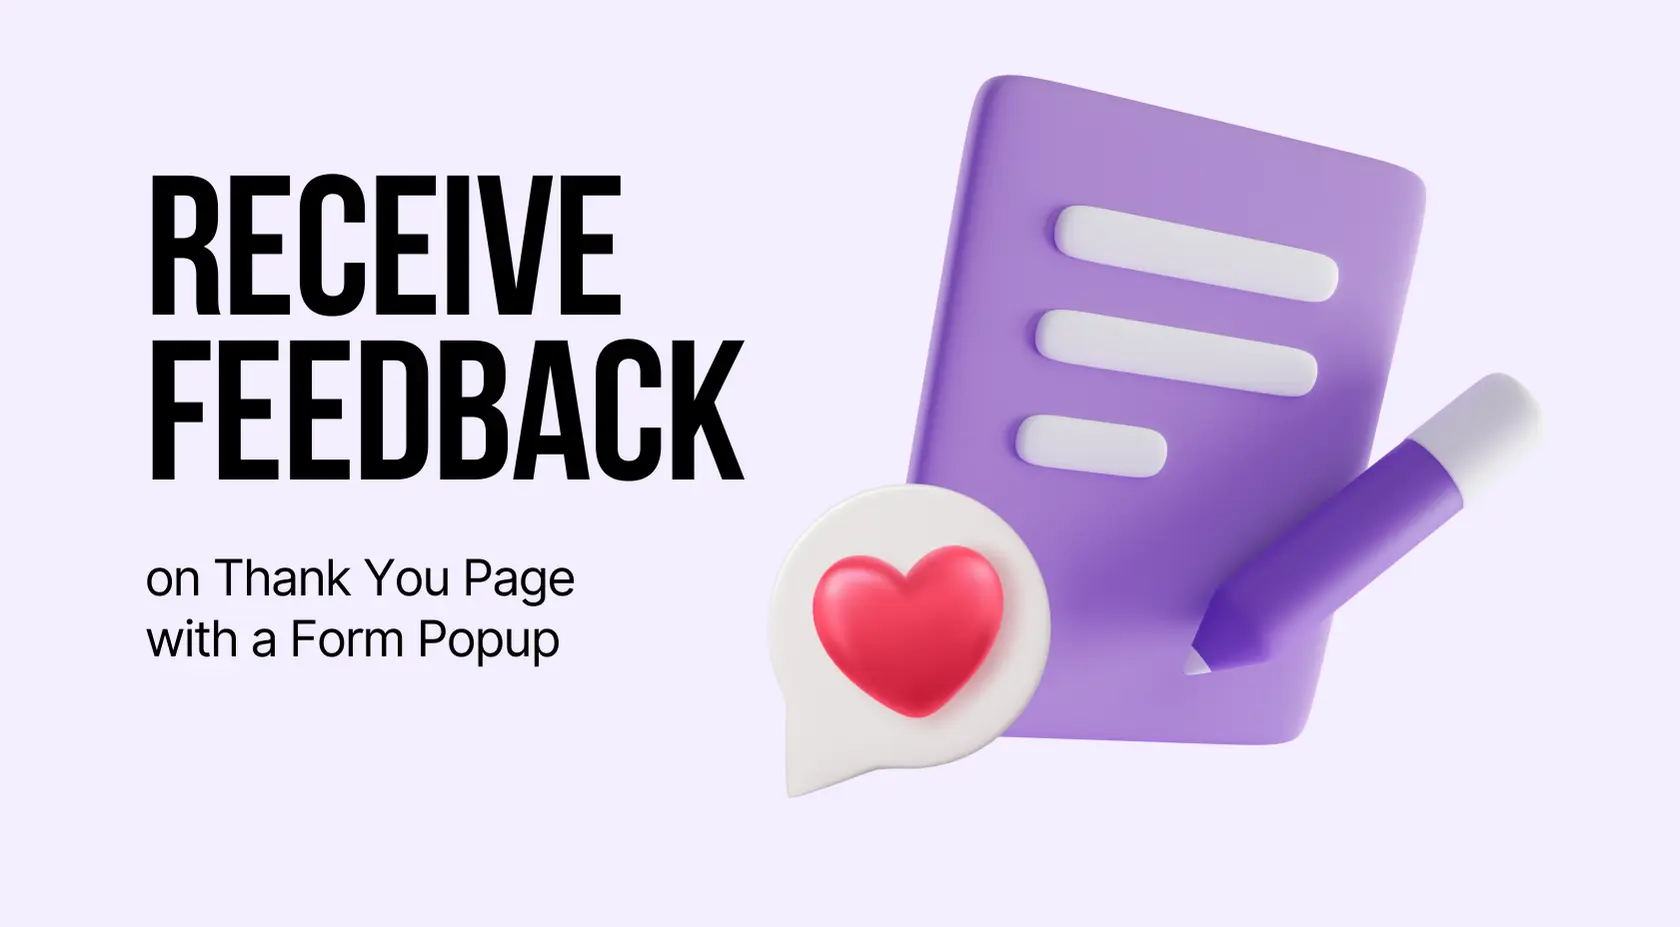 Receive Feedback on Thank You Page with a Form Popup